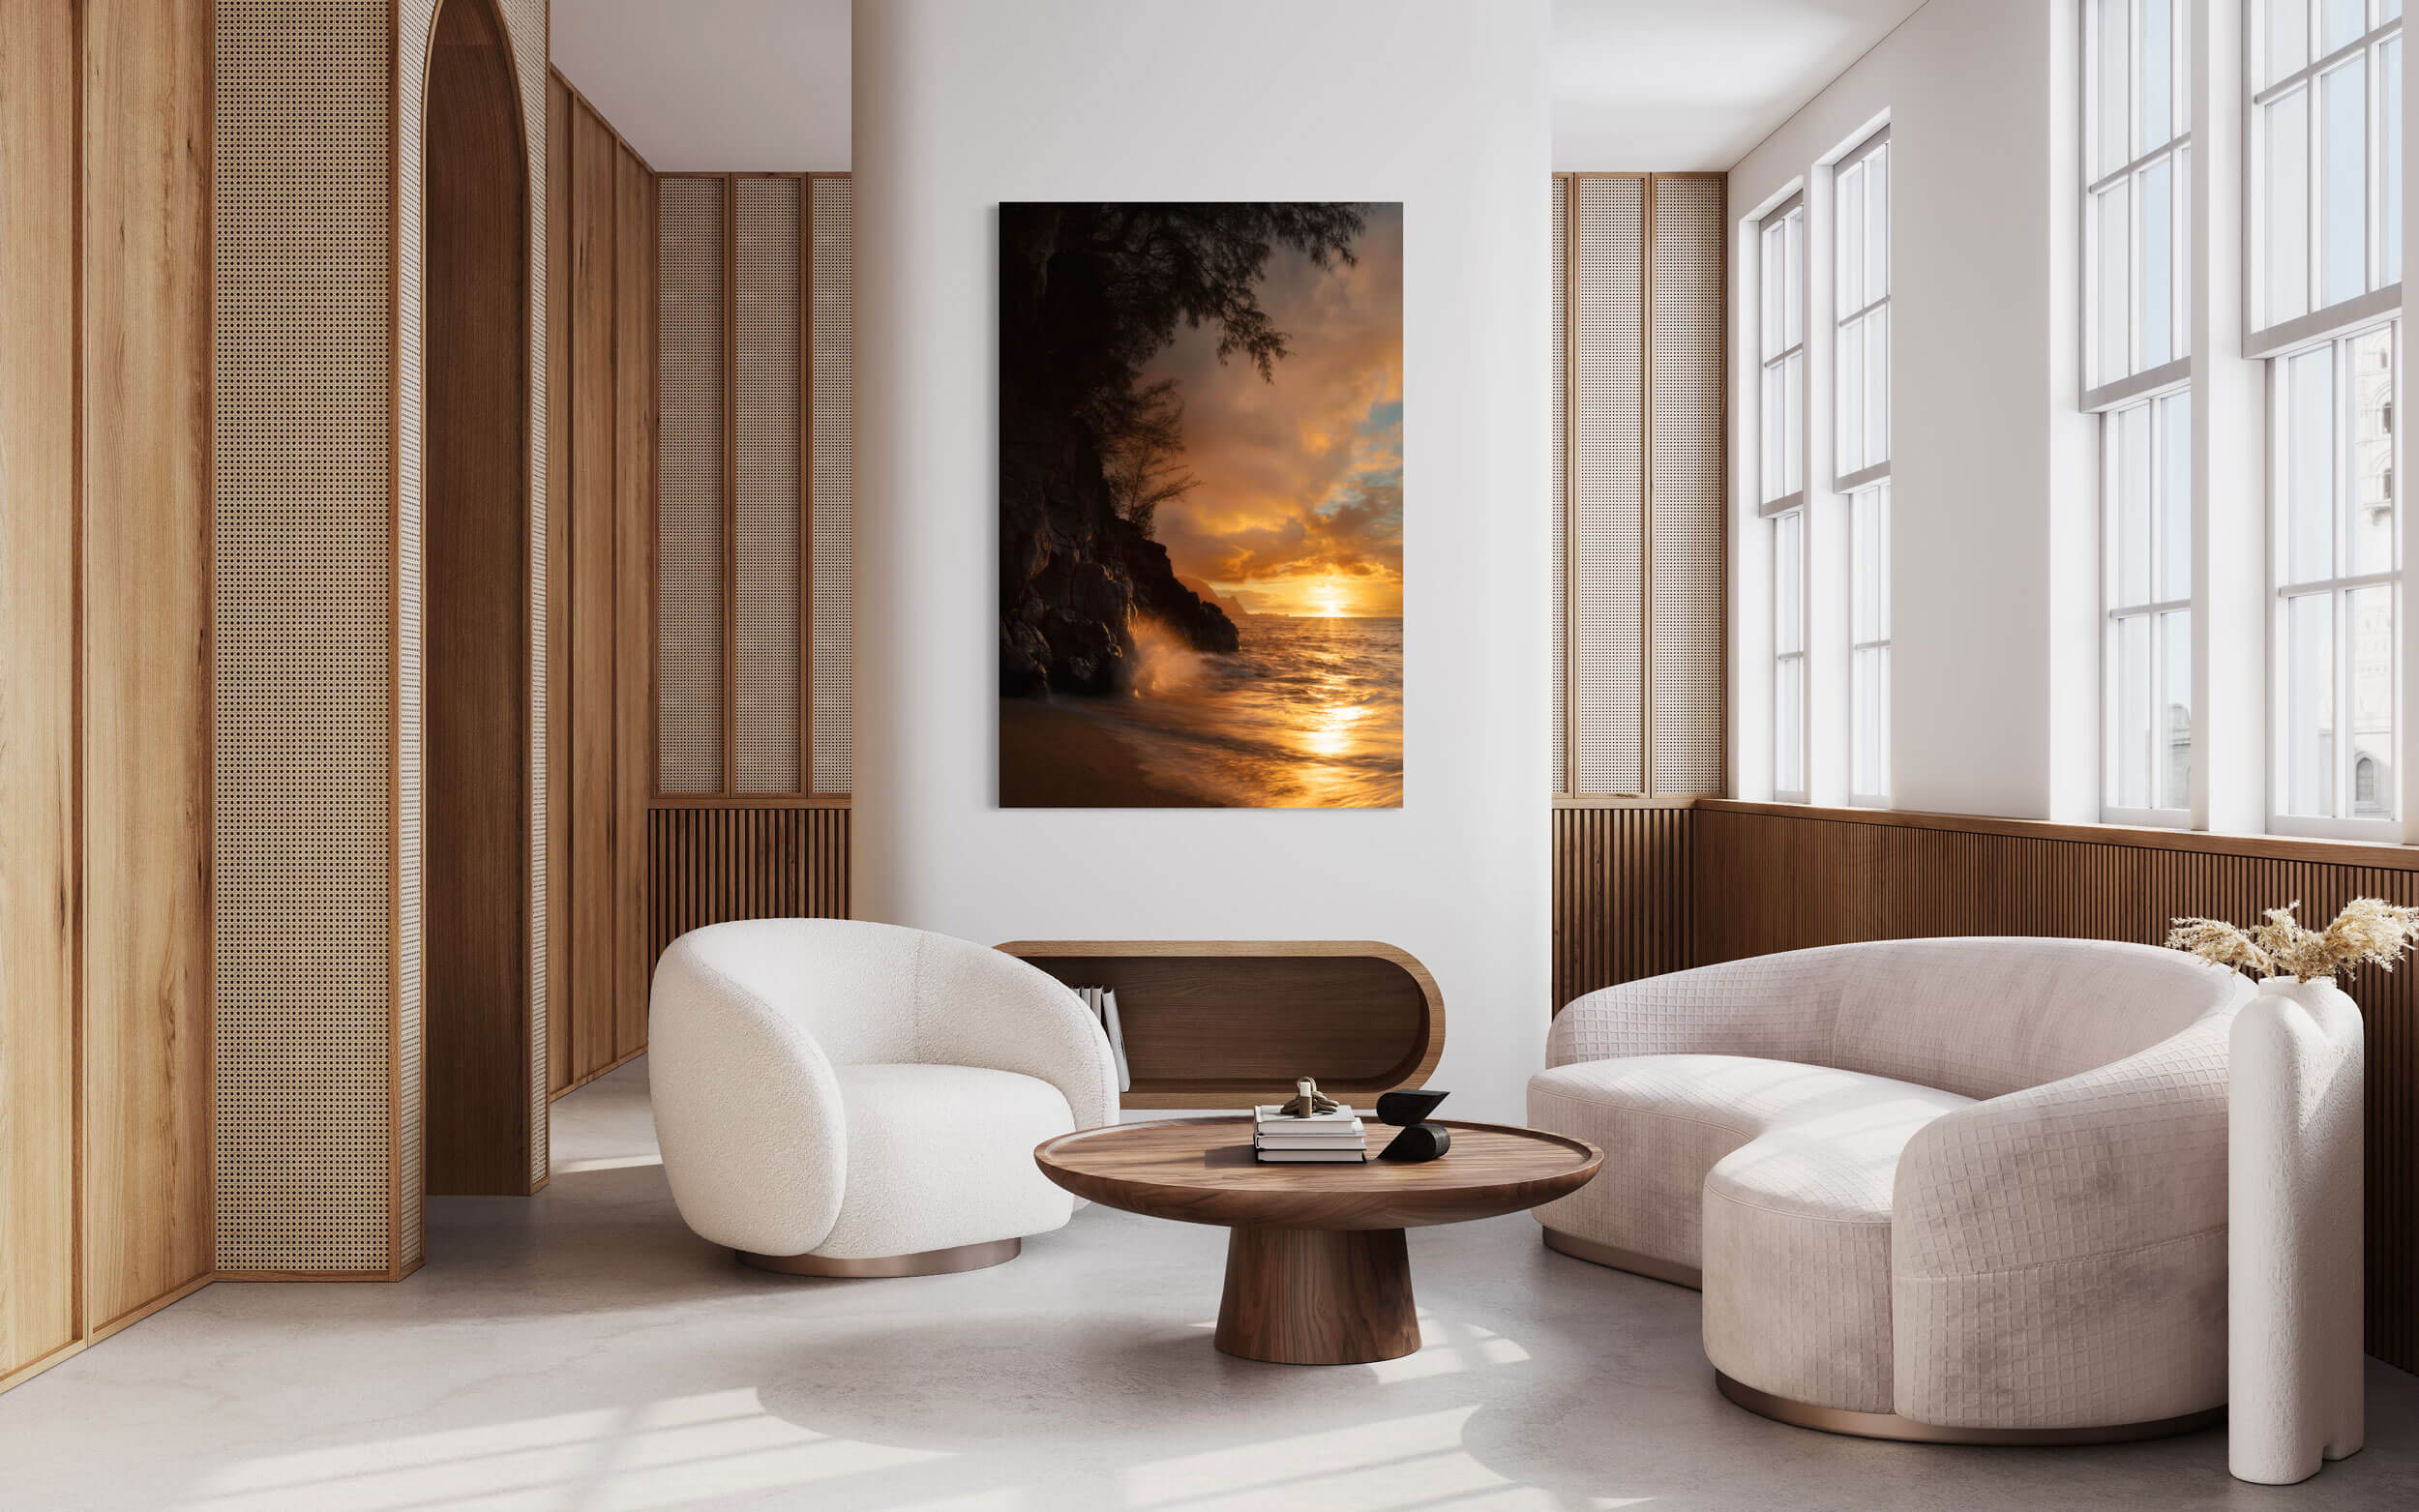 A piece of Kauai art showing a sunset picture from Hideaway Beach hangs in a living room.